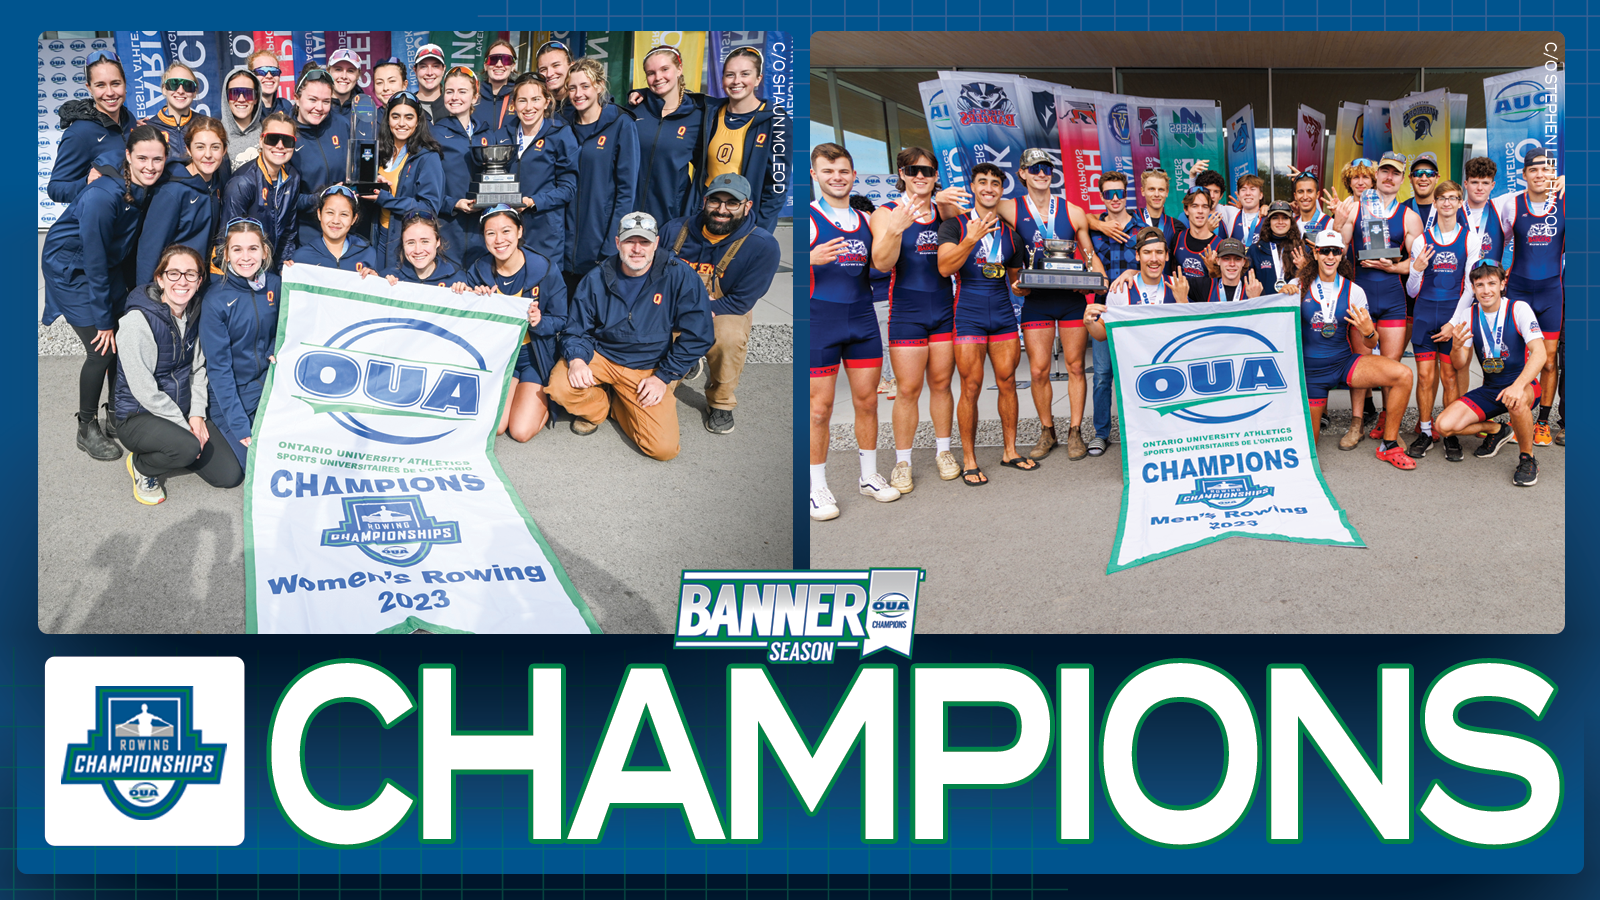 Graphic on predominantly blue background feature banner photos of Queen?s women's and Brock men's rowing teams, with large white text that reads 'Champions' and the OUA Rowing Championships logo underneath them